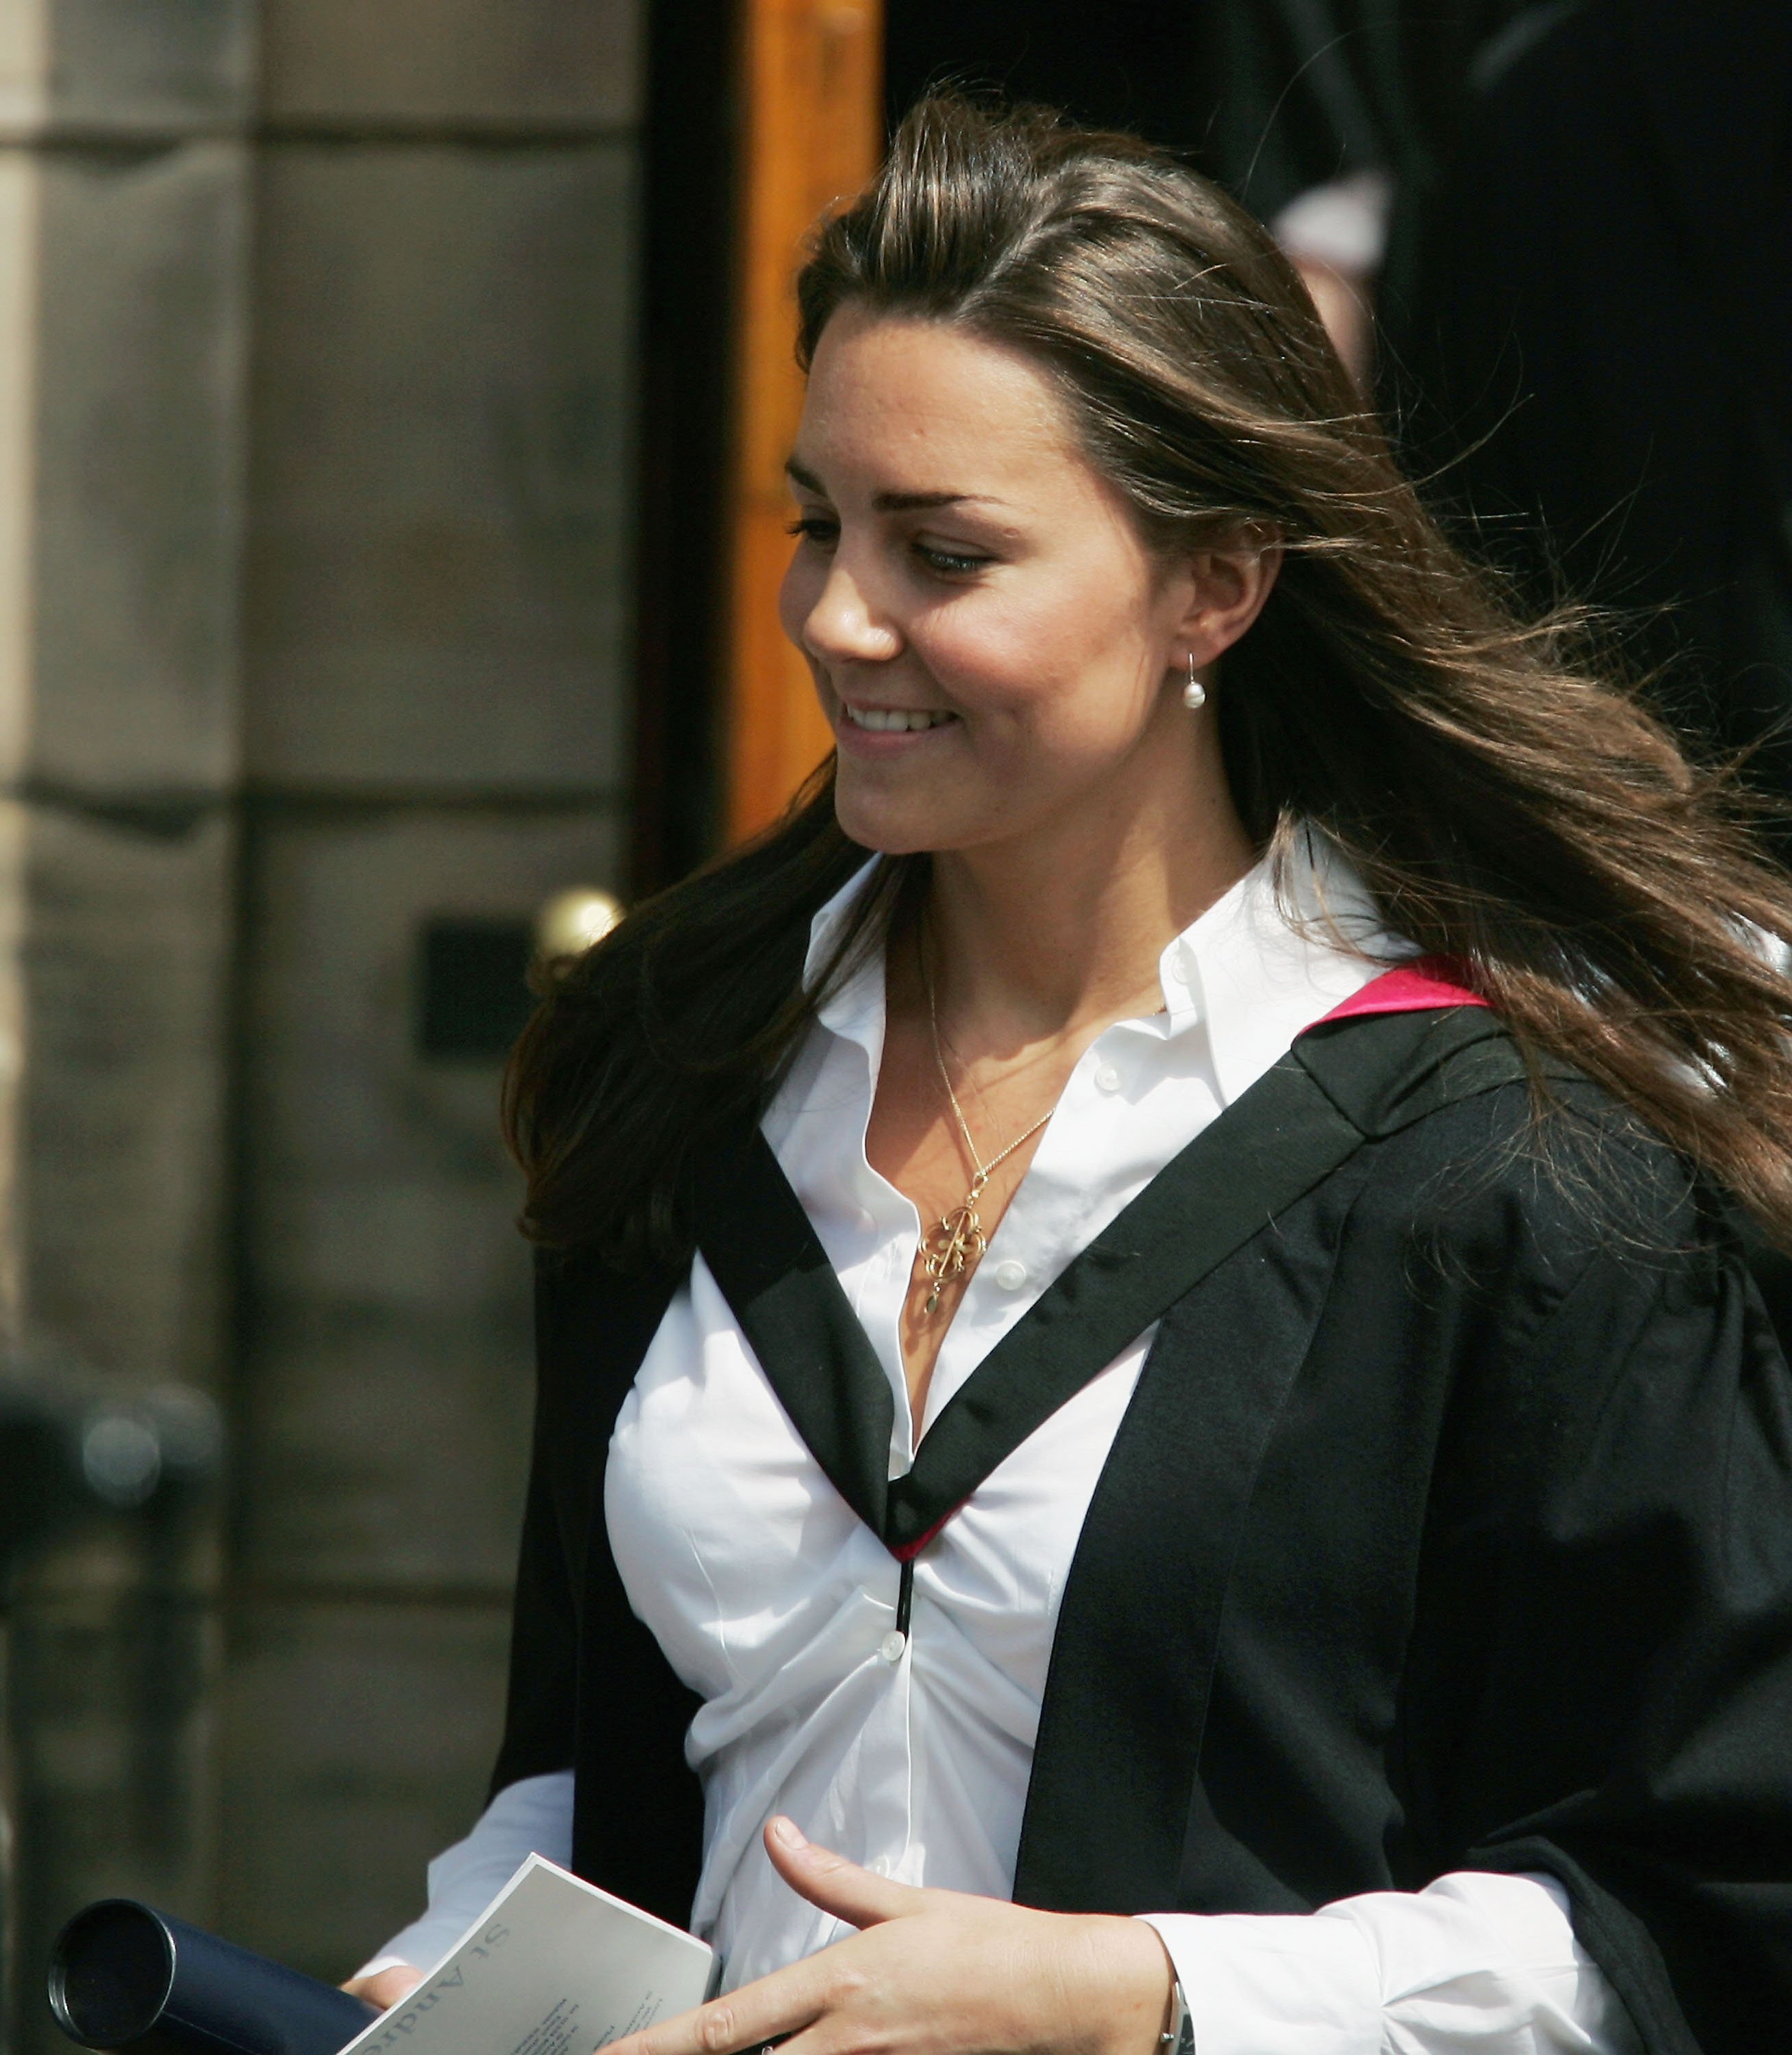 Kate Middleton at Younger Hall after her graduation ceremony, June 23, 2005 in St Andrews, Scotland. | Source: Getty Images